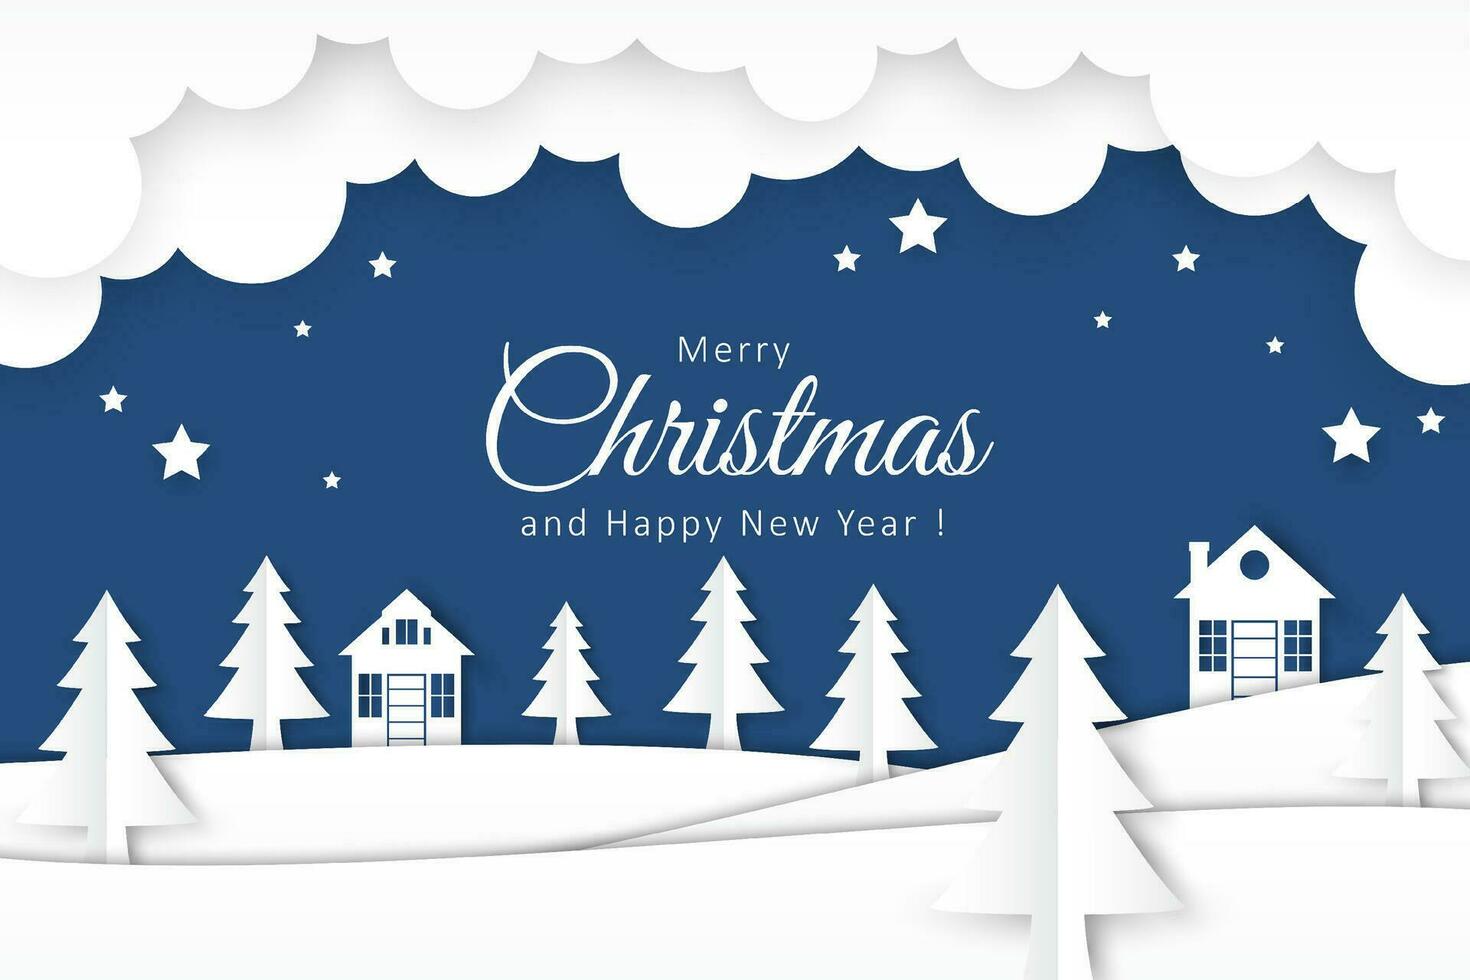 Christmas background in paper style design vector